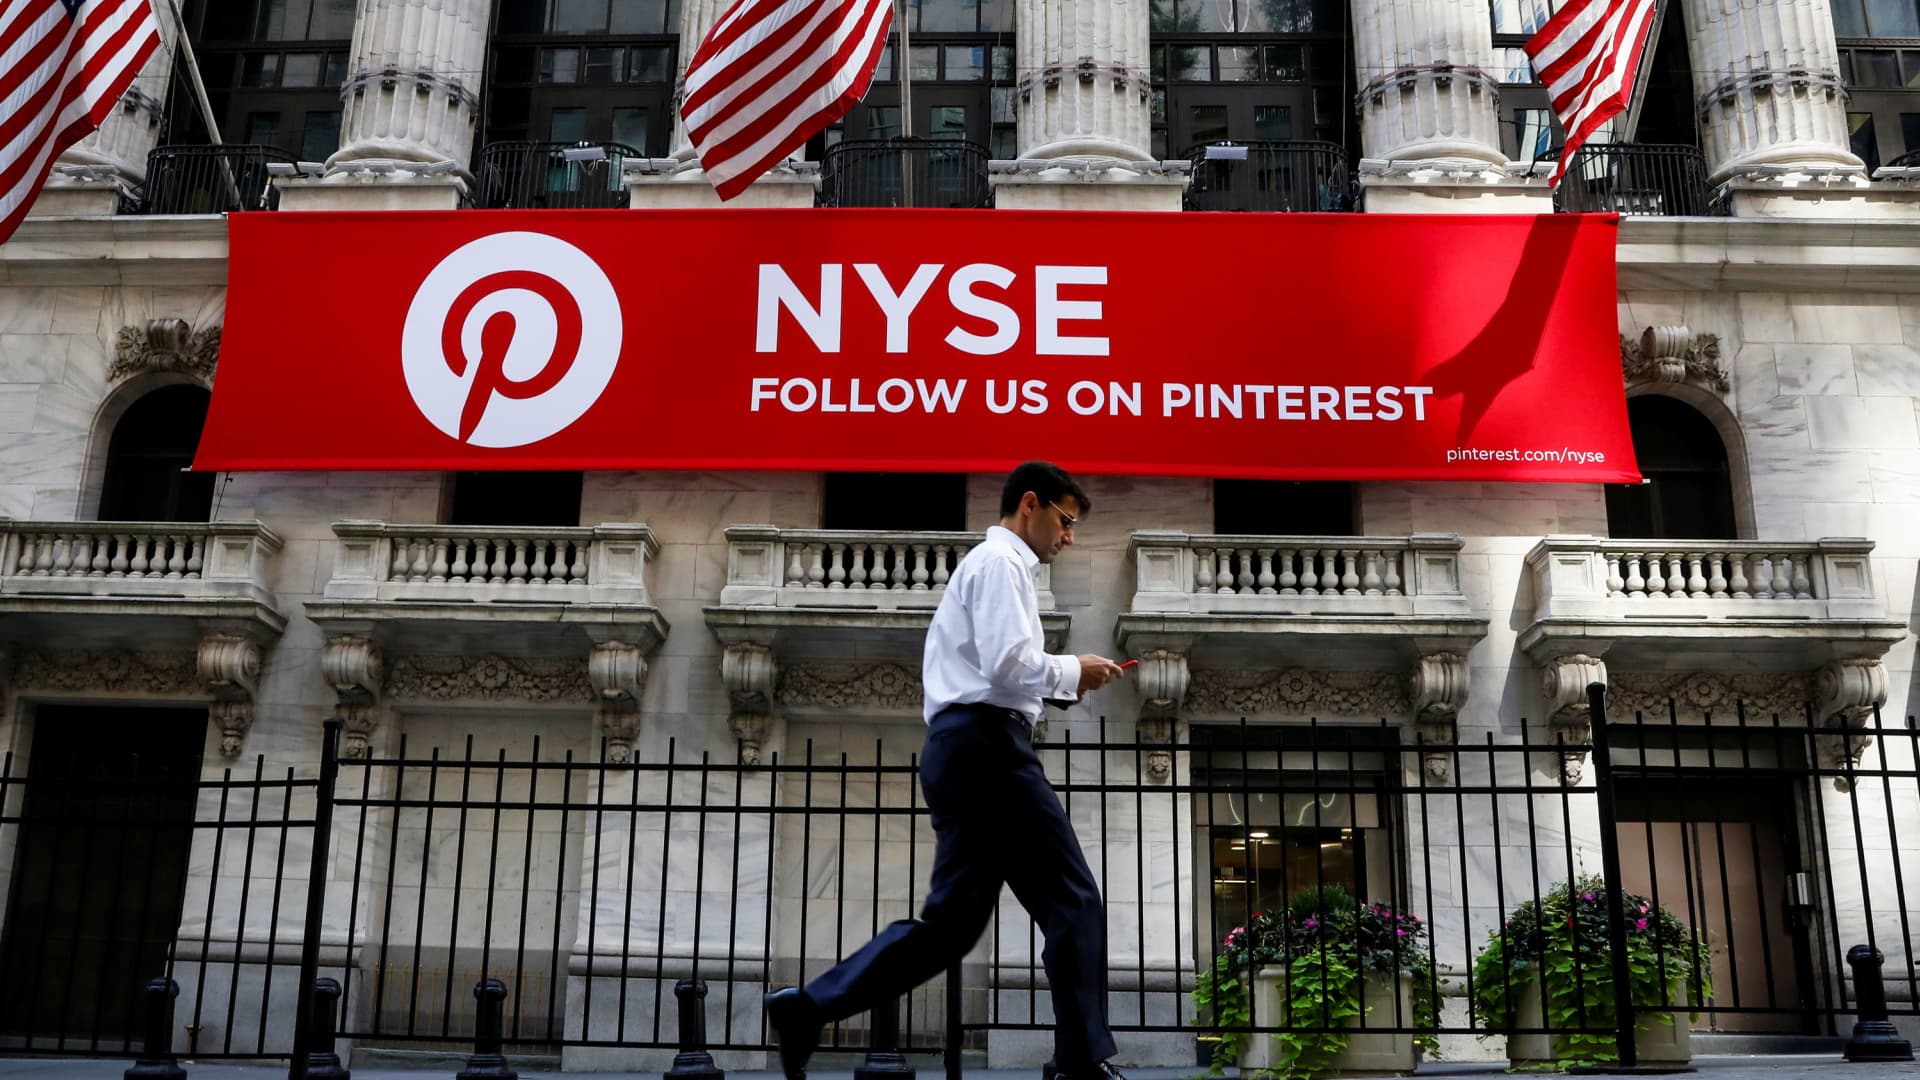 Pinterest can surge 25% as user engagement and monetization improve, Goldman Sachs says in upgrade